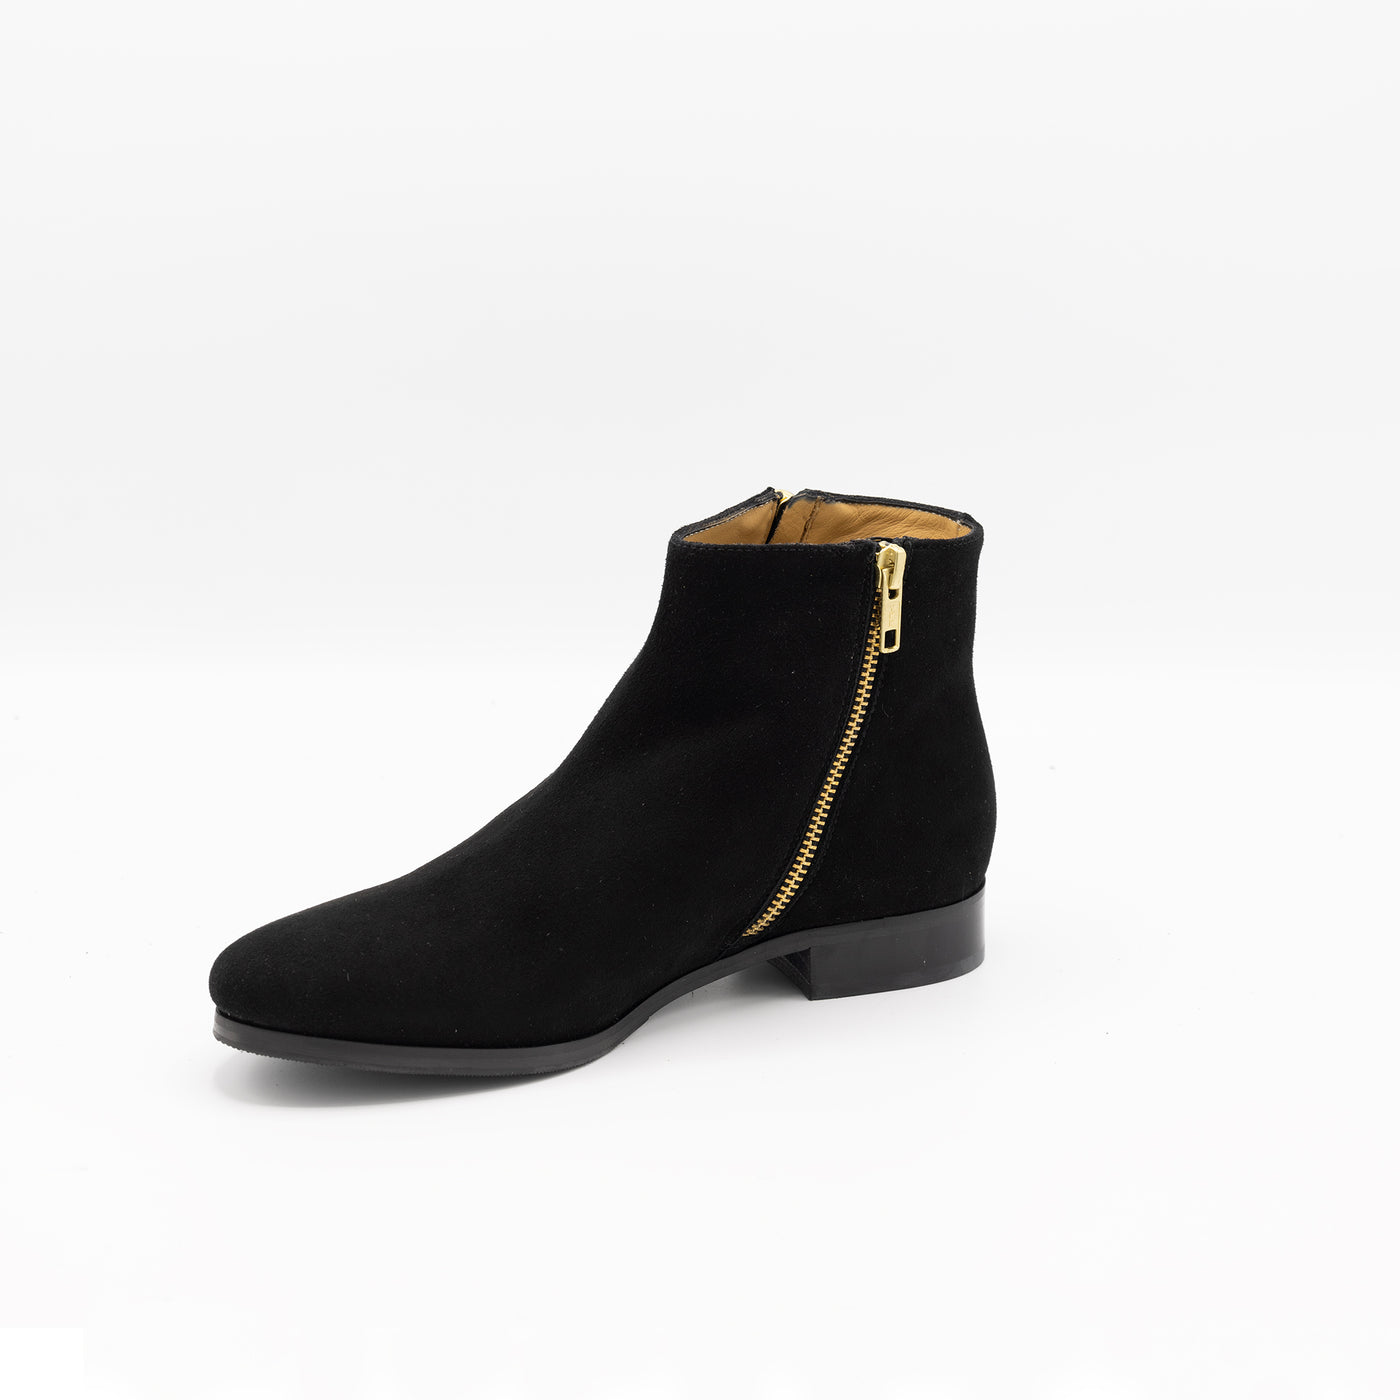 Black suede ankle boots with zippers on the sides